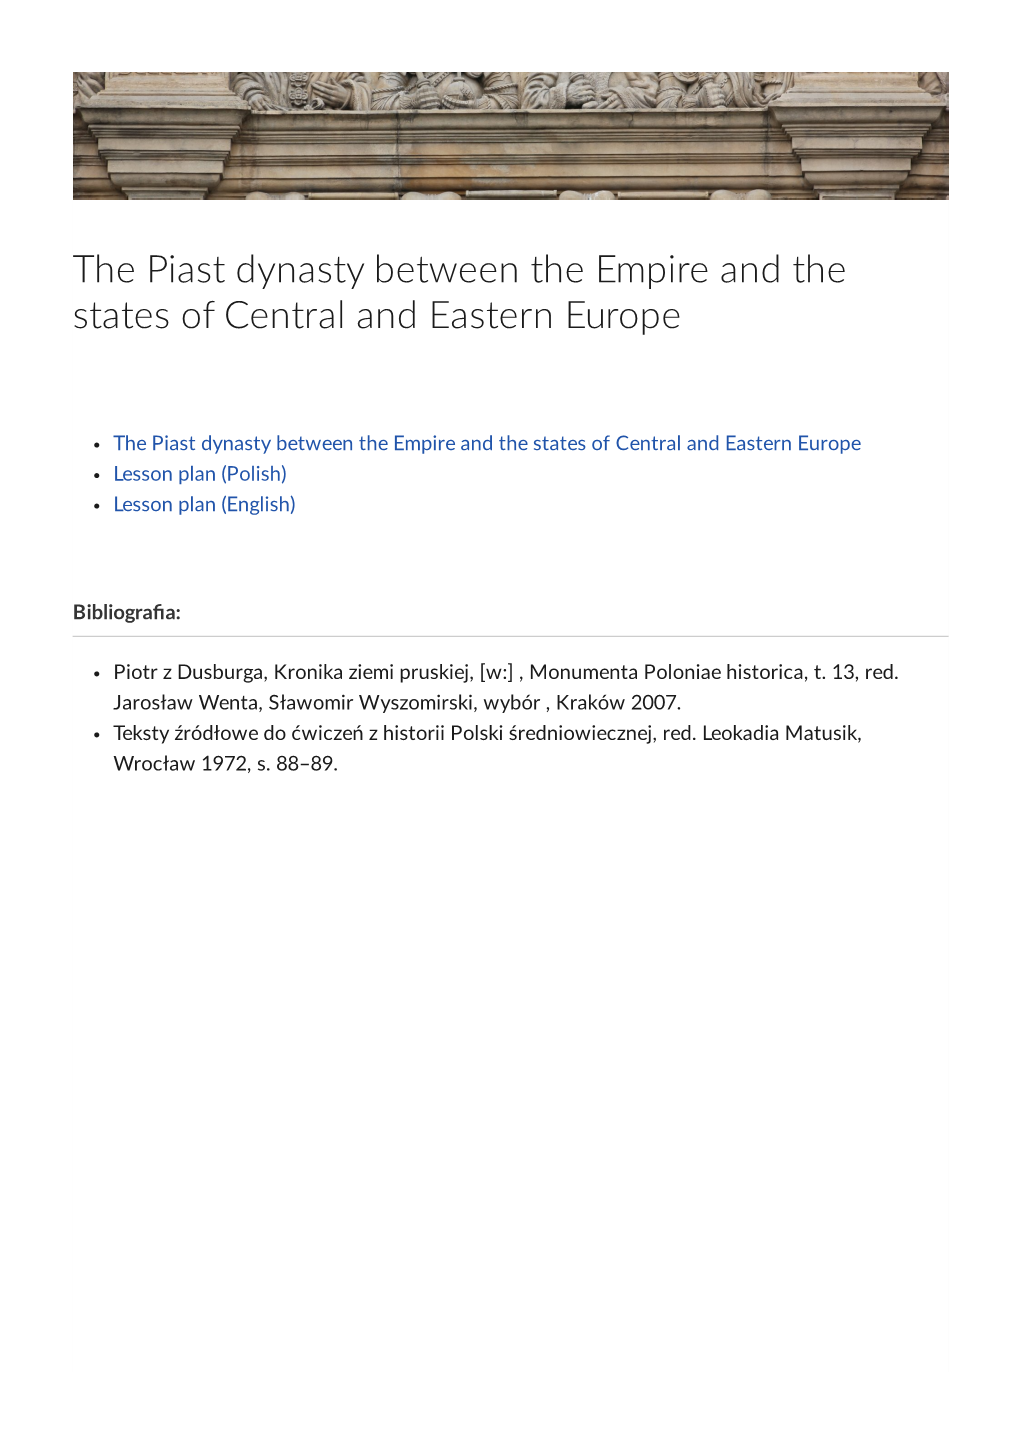 The Piast Dynasty Between the Empire and the States of Central and Eastern Europe